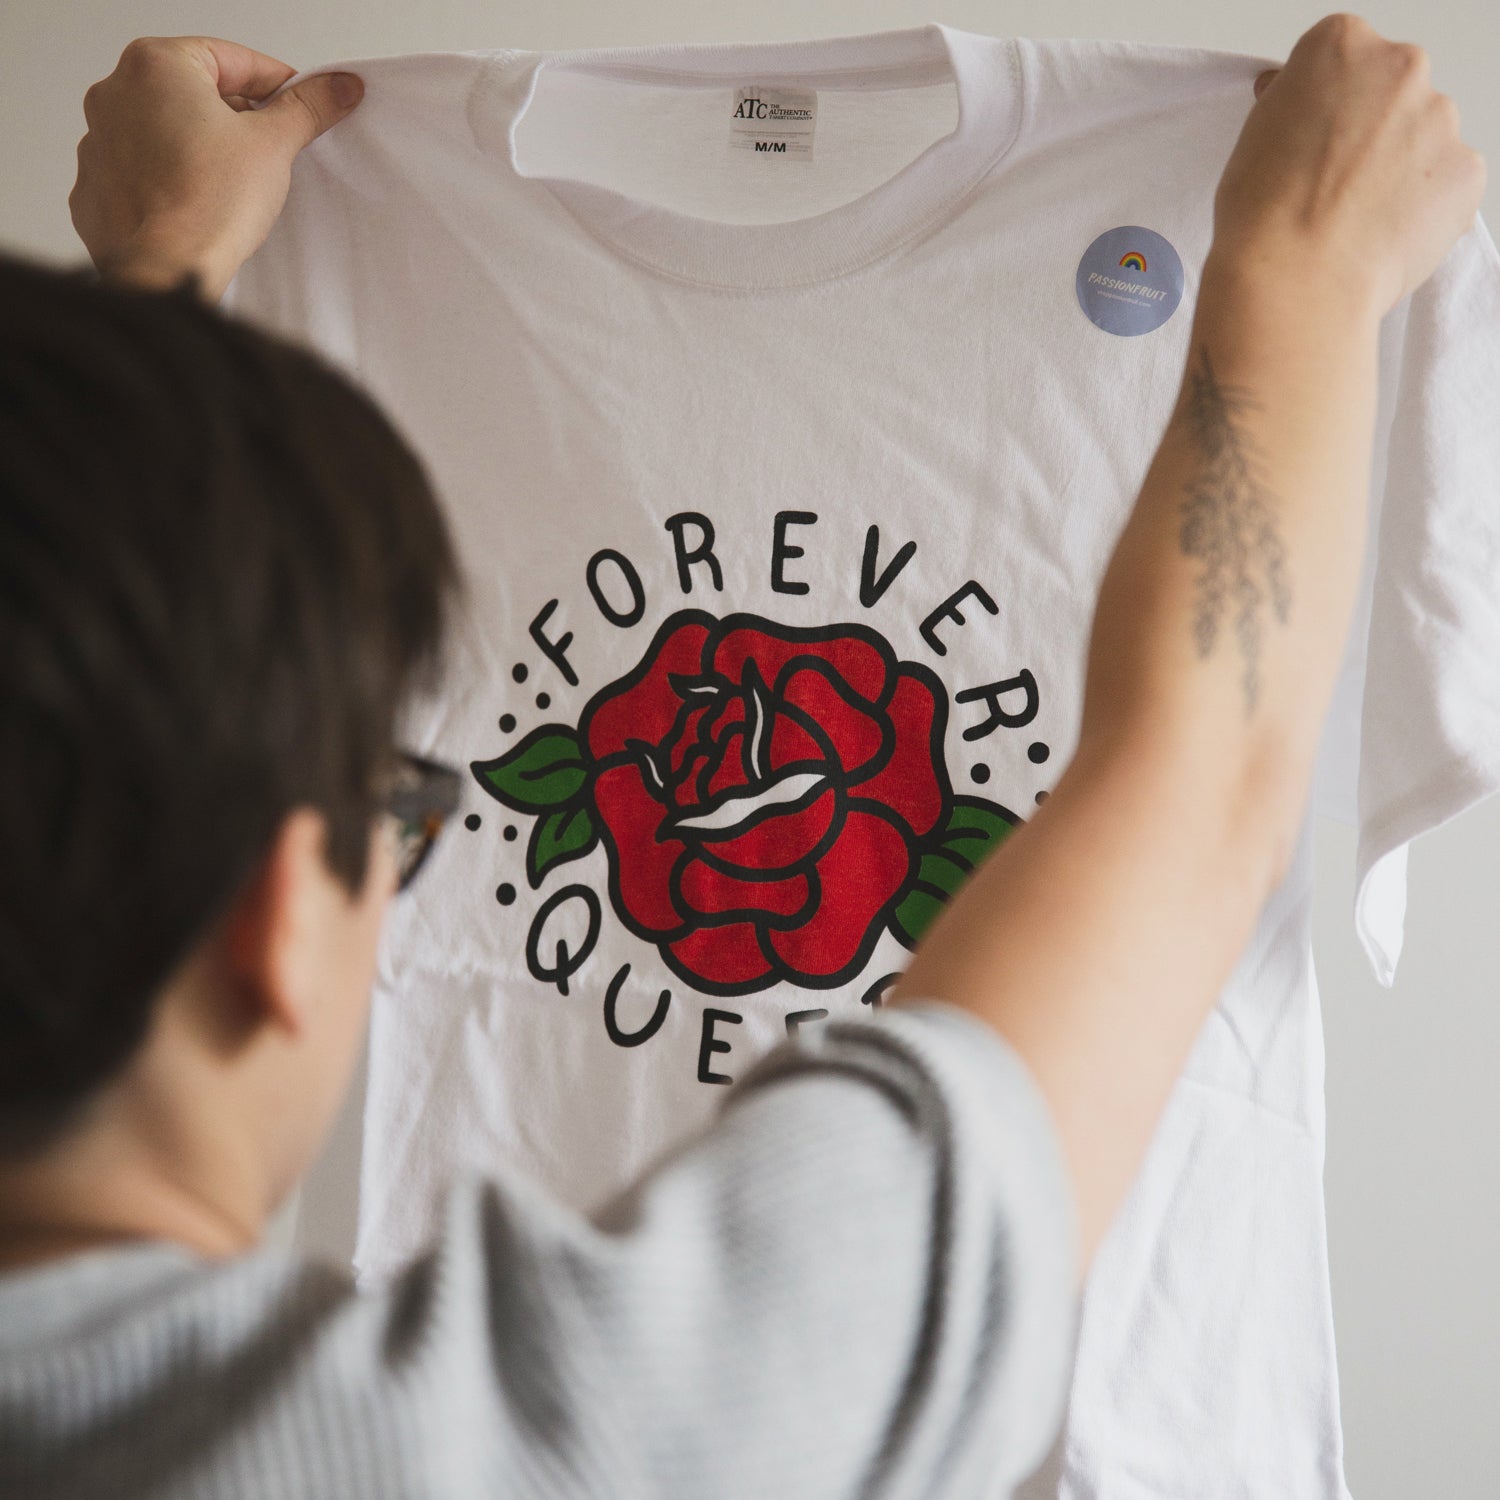 Passionfruit founder Liz Bertorelli holds up a white teeshirt with an illustration of a red rose. The shirt reads "Forever Queer".